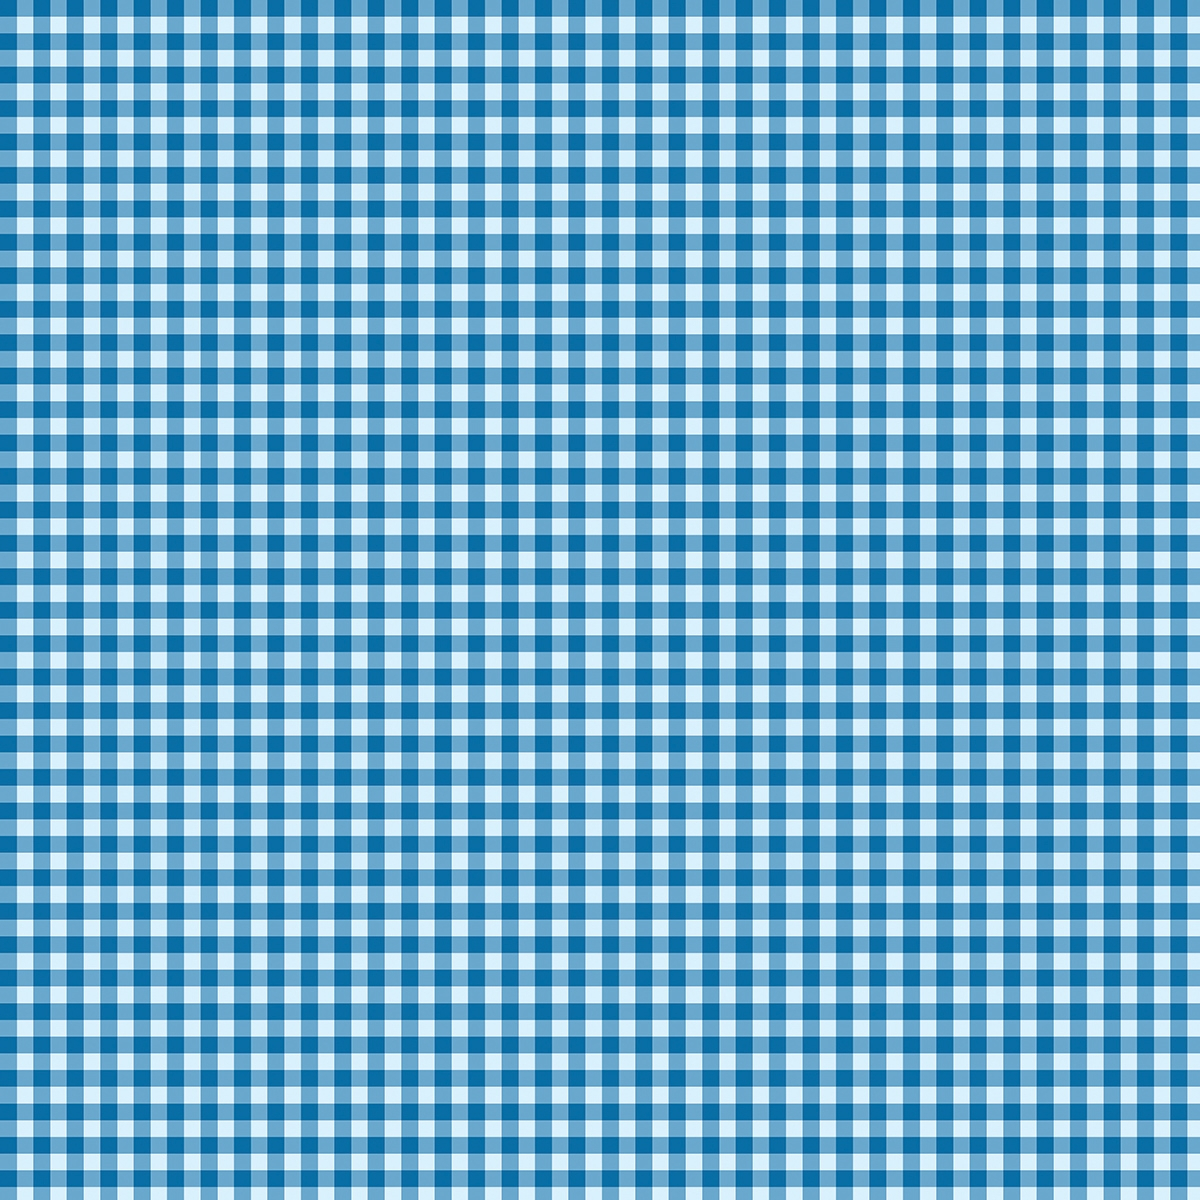 Gingham Embroidery Patterns Free Afternoon Blue Gingham Fabric